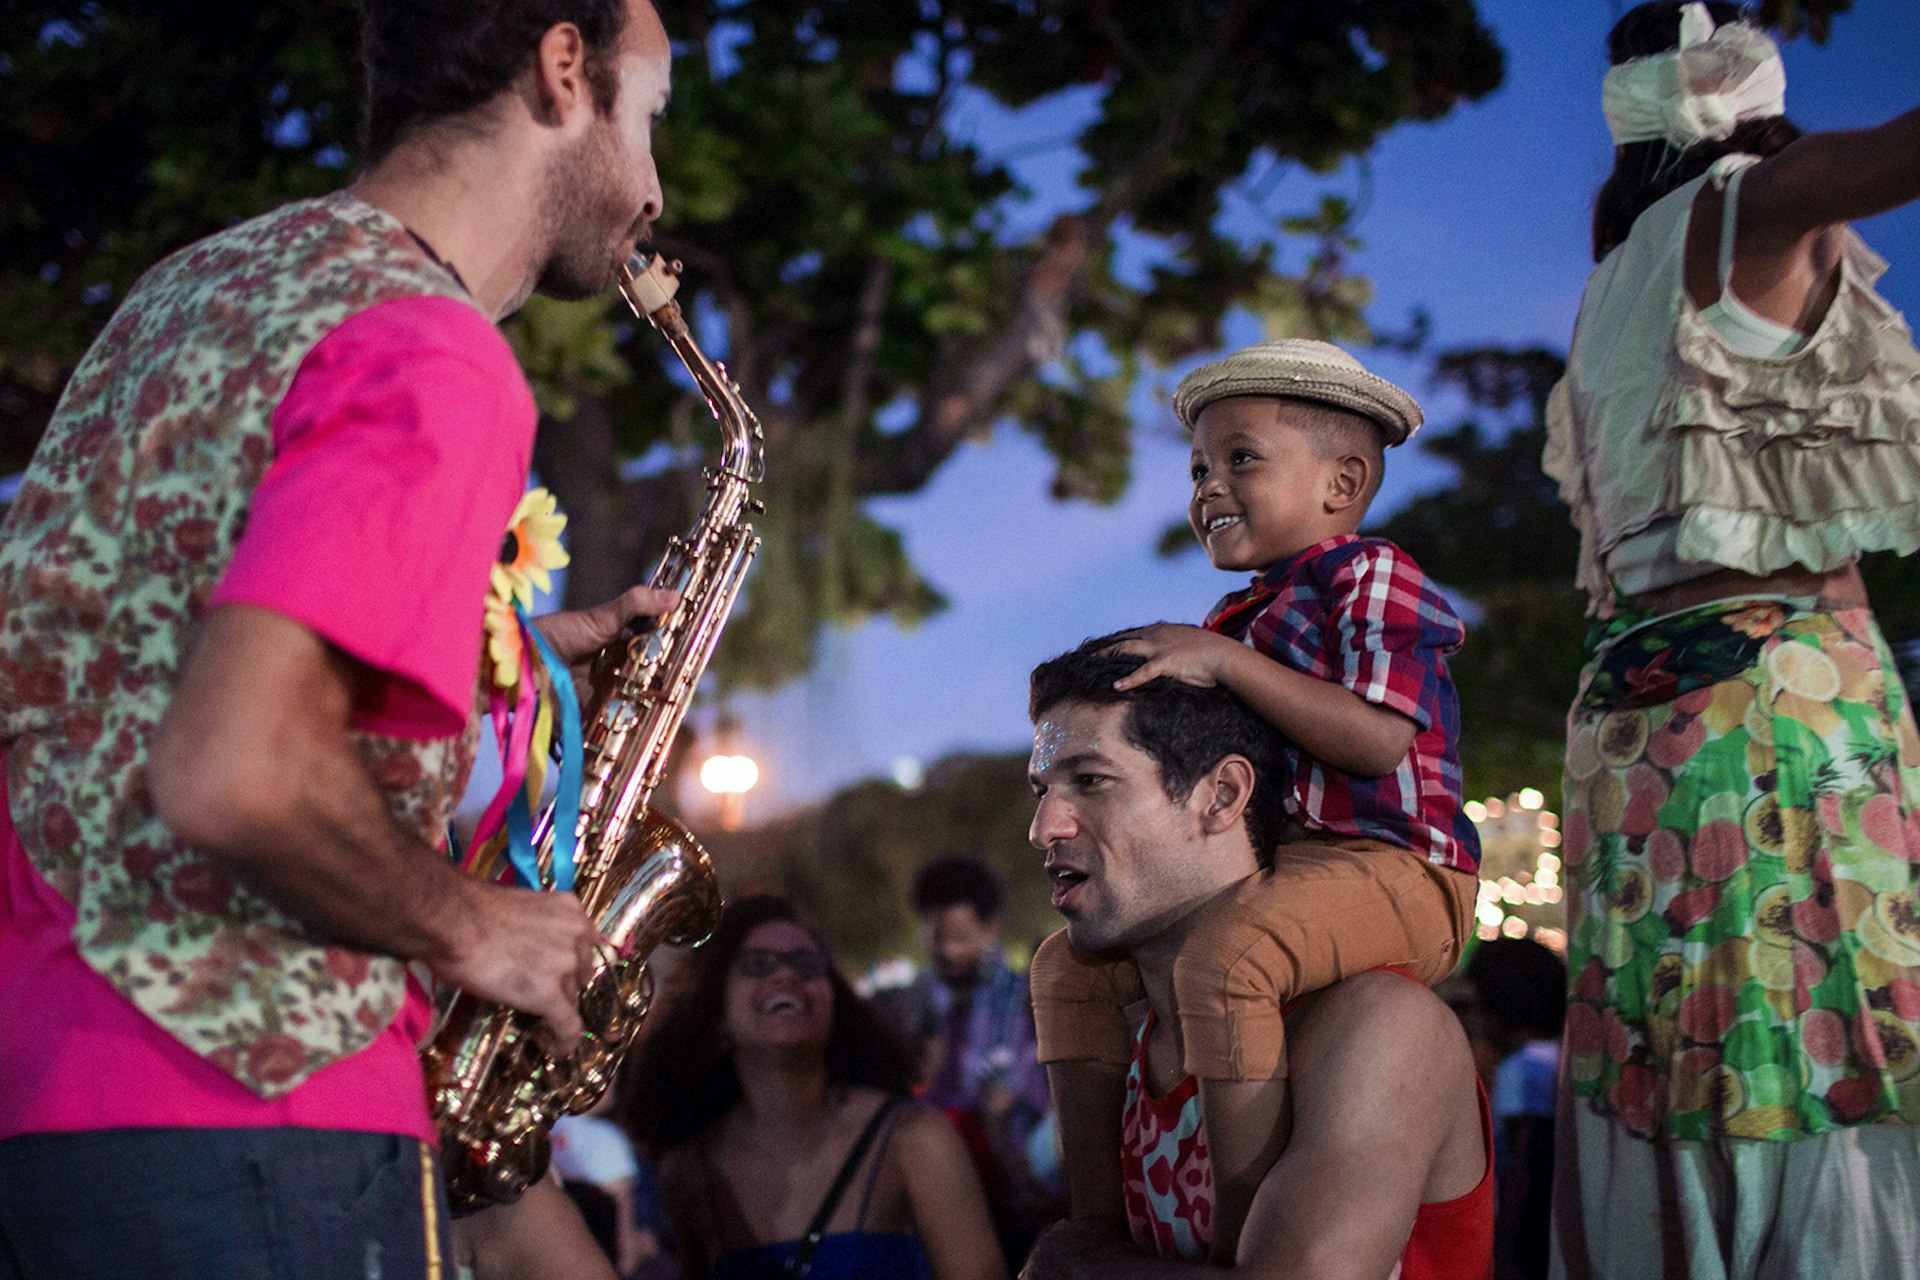 A little boy wearing a hat sits on a man's shoulders while a man in a pink shirt plays the saxophone for him in Rio de Janeiro, Brazil